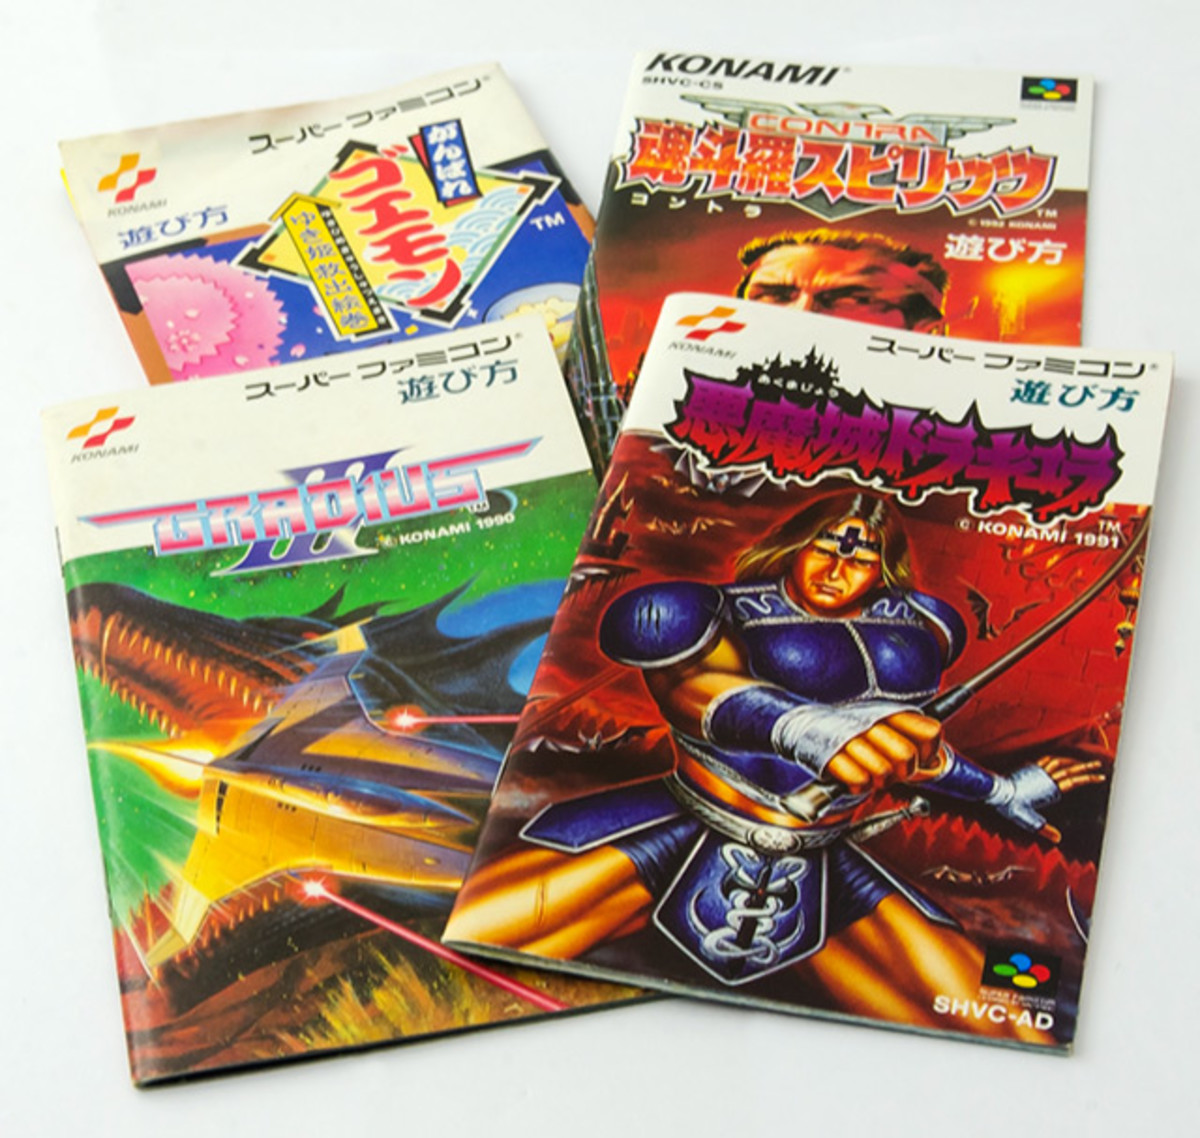 Konami SNES games. Some of the best Konami soundtracks come from these.